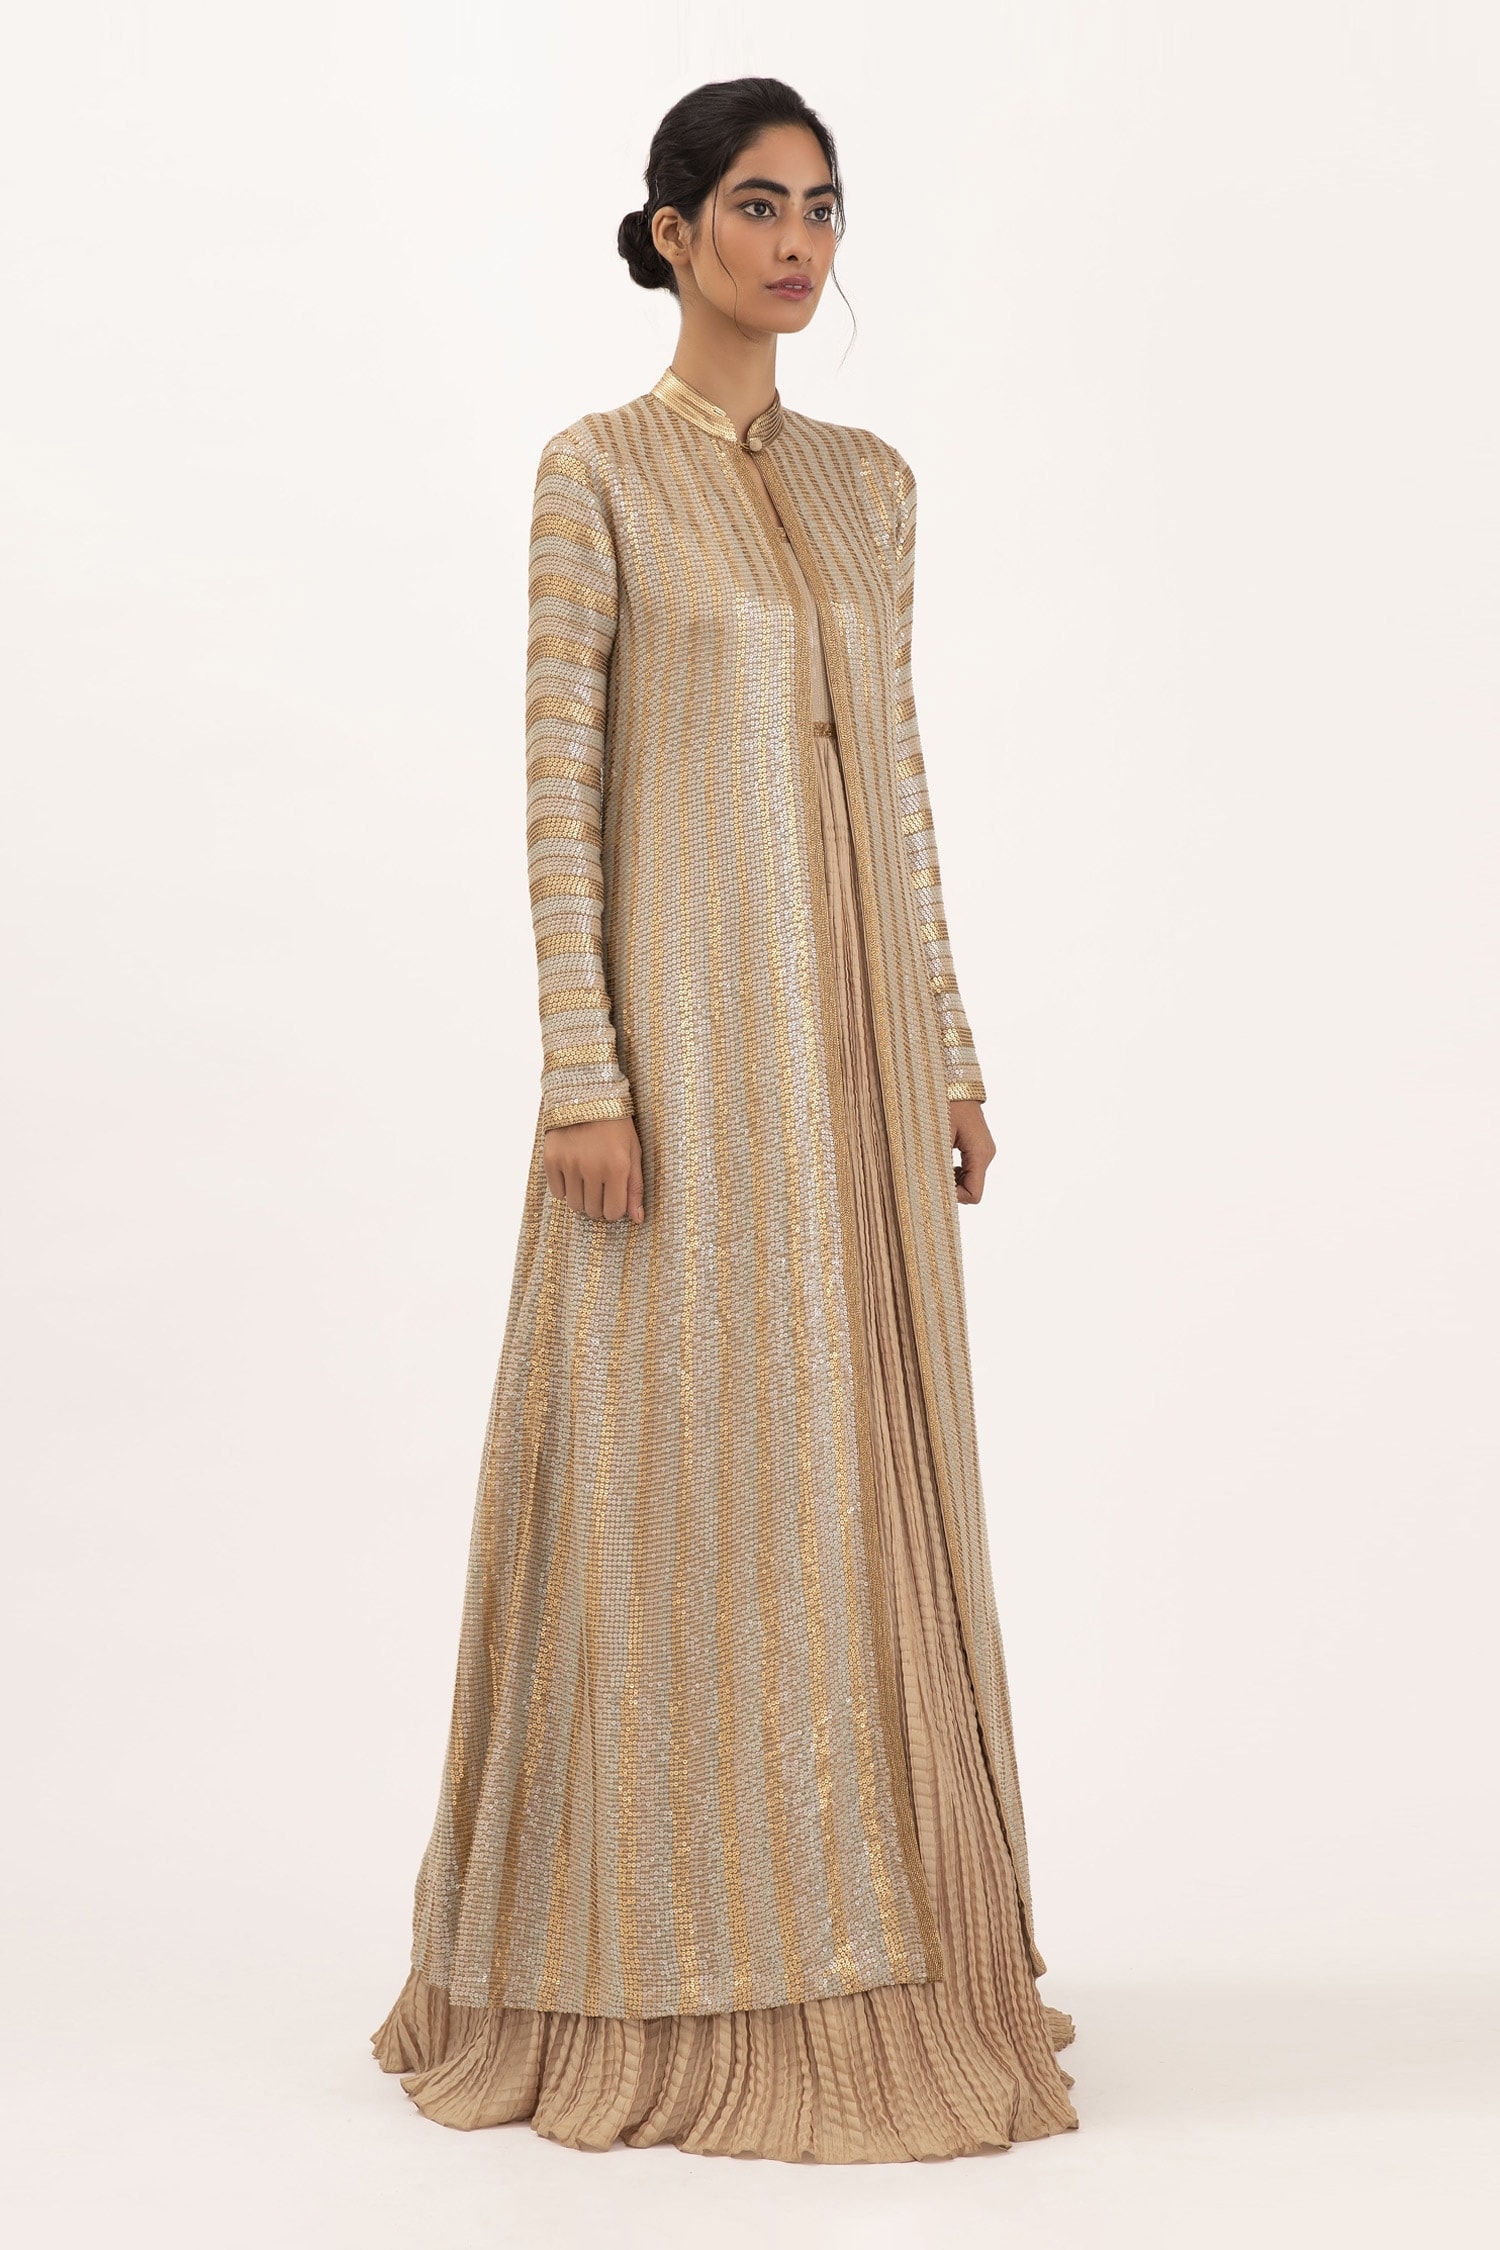 Nakul Sen Beige Chiffon Embroidery Sequin Band Jacket With Gown For Women